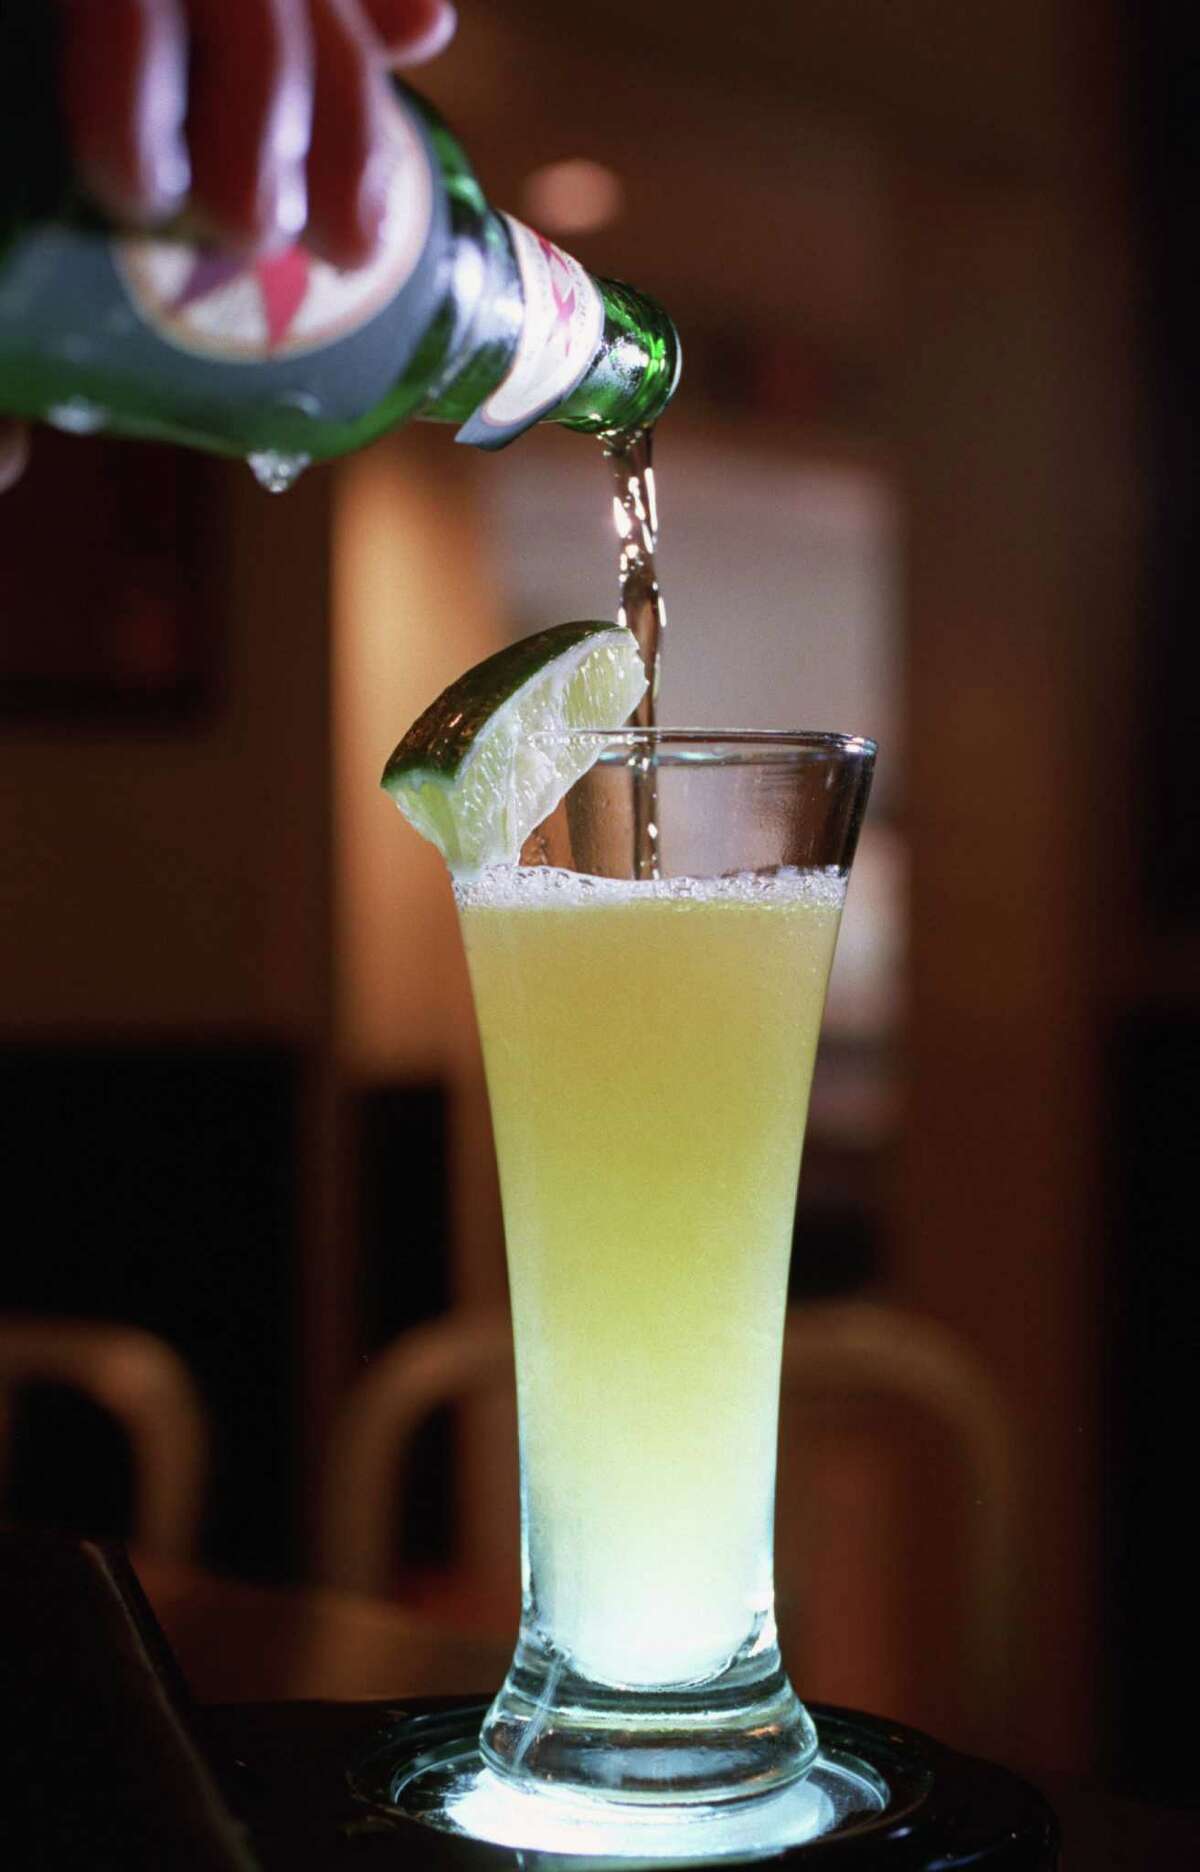 Dos Equis beer is added to a glass containing tequila and lime juice.